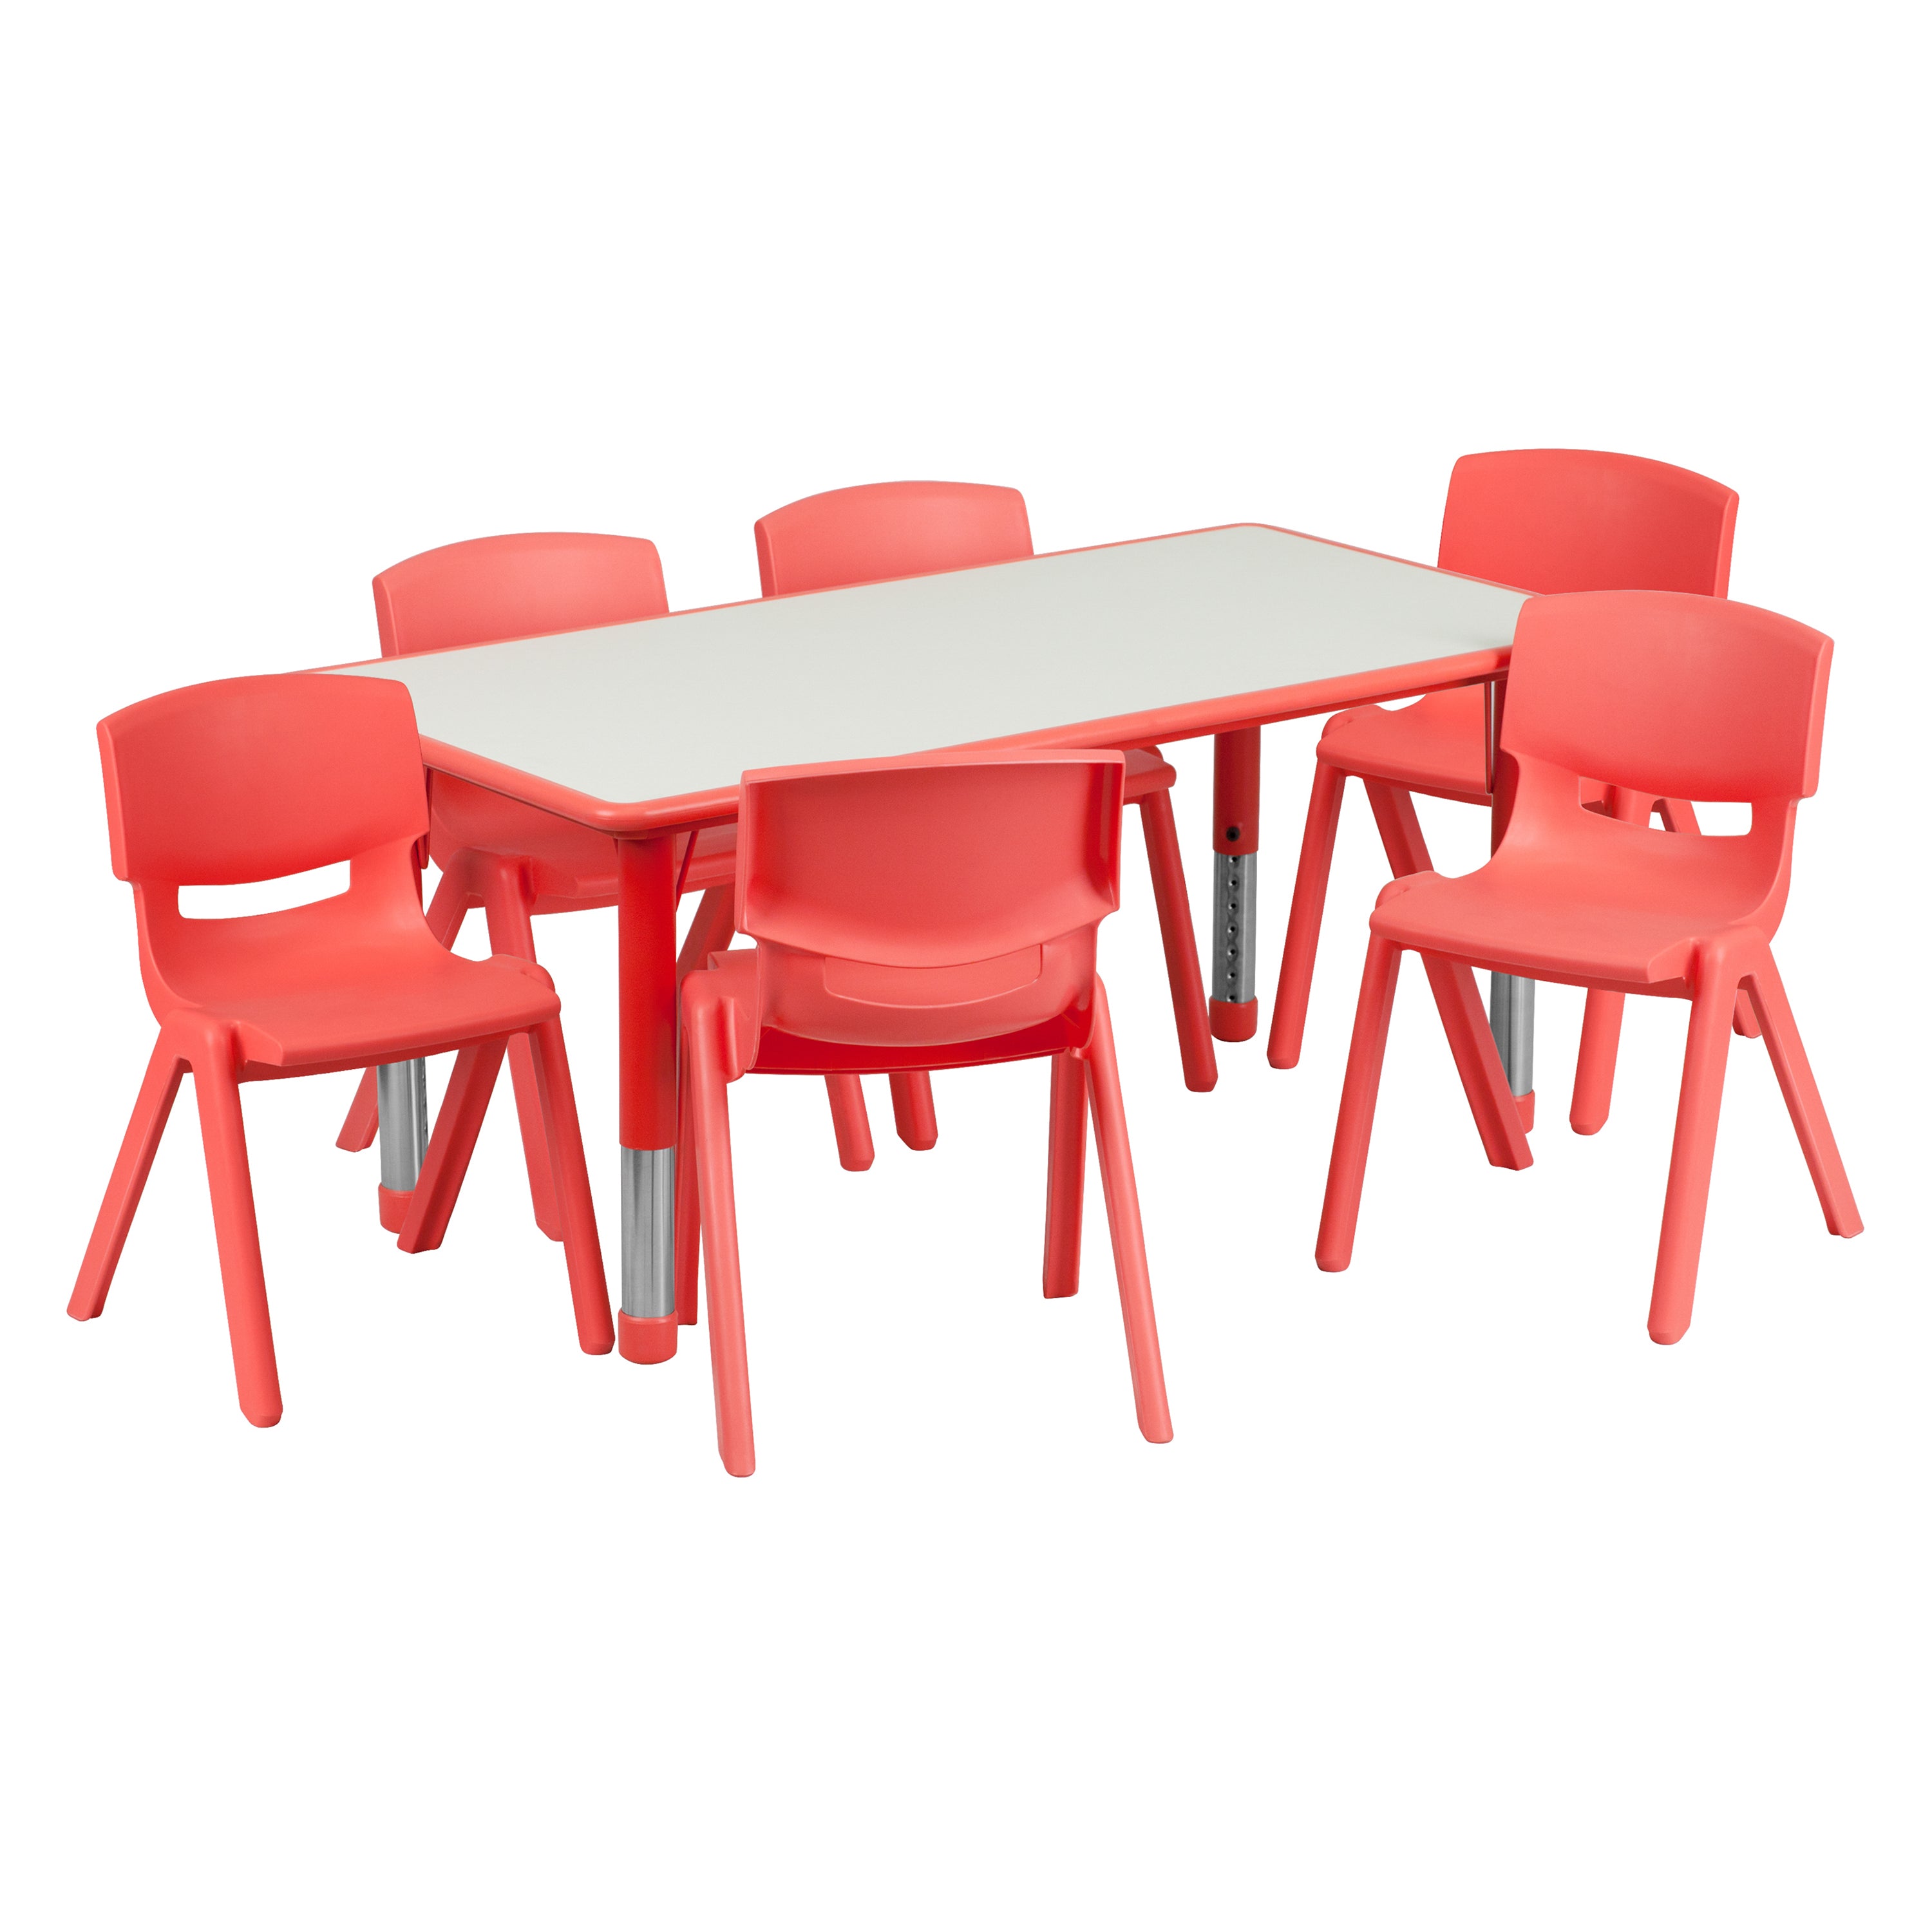 23.625"W x 47.25"L Rectangular Plastic Height Adjustable Activity Table Set with 6 Chairs-Rectangular Activity Table Set-Flash Furniture-Wall2Wall Furnishings